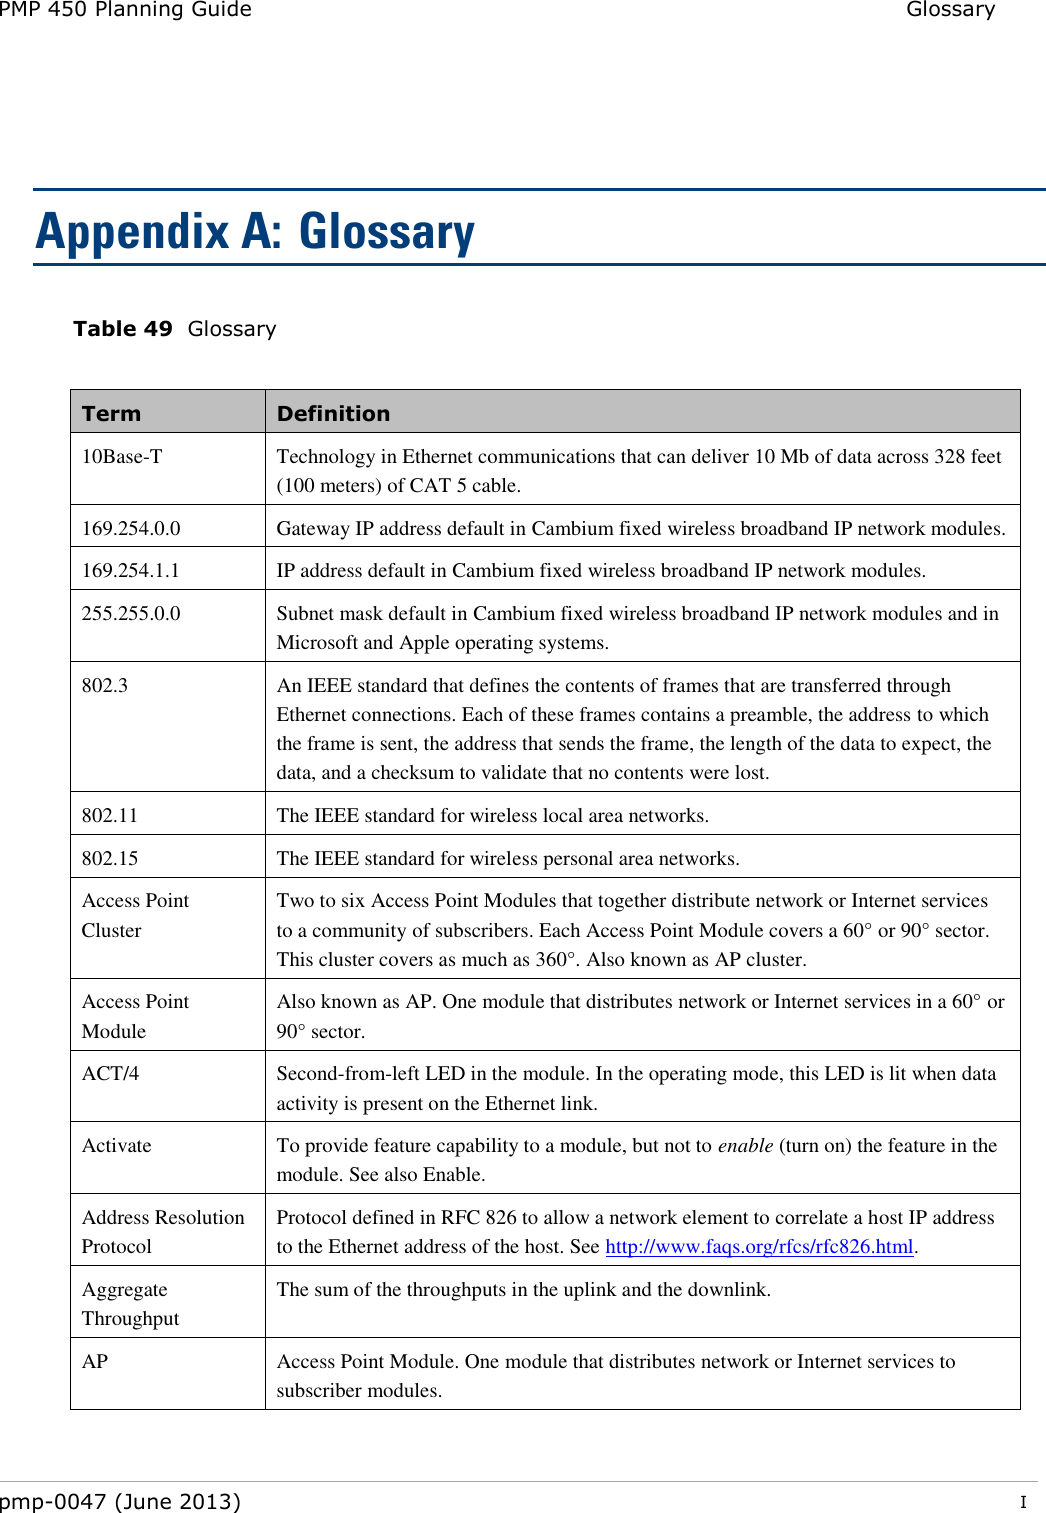 PMP 450 Planning Guide Glossary   pmp-0047 (June 2013)  I  Appendix A:  Glossary Table 49  Glossary  Term Definition 10Base-T Technology in Ethernet communications that can deliver 10 Mb of data across 328 feet (100 meters) of CAT 5 cable. 169.254.0.0 Gateway IP address default in Cambium fixed wireless broadband IP network modules. 169.254.1.1 IP address default in Cambium fixed wireless broadband IP network modules. 255.255.0.0 Subnet mask default in Cambium fixed wireless broadband IP network modules and in Microsoft and Apple operating systems. 802.3 An IEEE standard that defines the contents of frames that are transferred through Ethernet connections. Each of these frames contains a preamble, the address to which the frame is sent, the address that sends the frame, the length of the data to expect, the data, and a checksum to validate that no contents were lost. 802.11 The IEEE standard for wireless local area networks. 802.15 The IEEE standard for wireless personal area networks. Access Point Cluster Two to six Access Point Modules that together distribute network or Internet services to a community of subscribers. Each Access Point Module covers a 60° or 90° sector. This cluster covers as much as 360°. Also known as AP cluster. Access Point Module Also known as AP. One module that distributes network or Internet services in a 60° or 90° sector. ACT/4 Second-from-left LED in the module. In the operating mode, this LED is lit when data activity is present on the Ethernet link. Activate To provide feature capability to a module, but not to enable (turn on) the feature in the module. See also Enable. Address Resolution Protocol Protocol defined in RFC 826 to allow a network element to correlate a host IP address to the Ethernet address of the host. See http://www.faqs.org/rfcs/rfc826.html. Aggregate Throughput The sum of the throughputs in the uplink and the downlink. AP Access Point Module. One module that distributes network or Internet services to subscriber modules. 